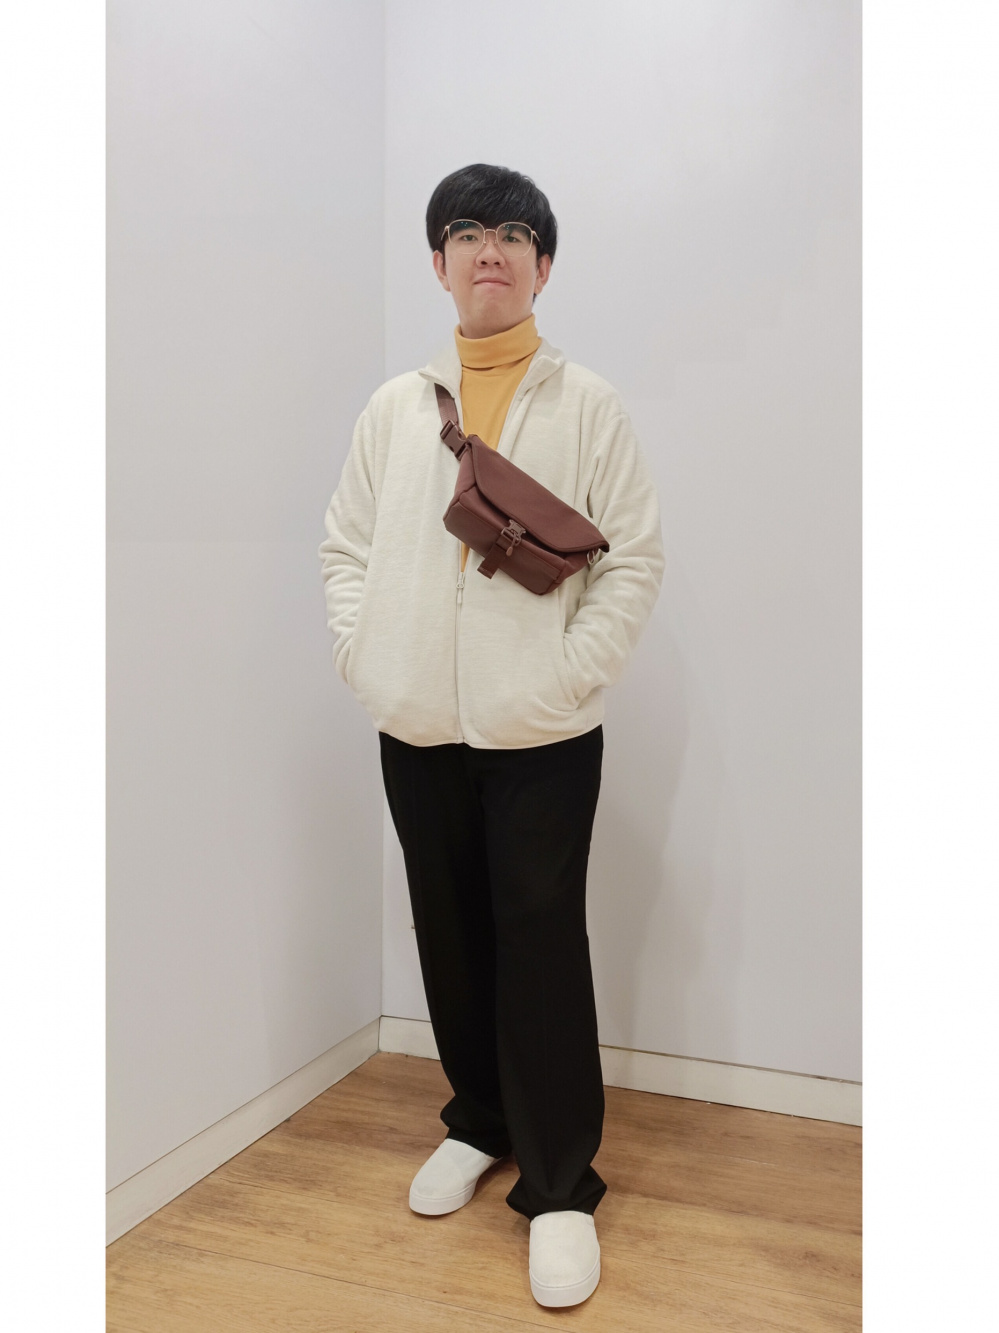 Check styling ideas for「Wide-Fit Pleated Pants、Italian Leather Oiled Belt」